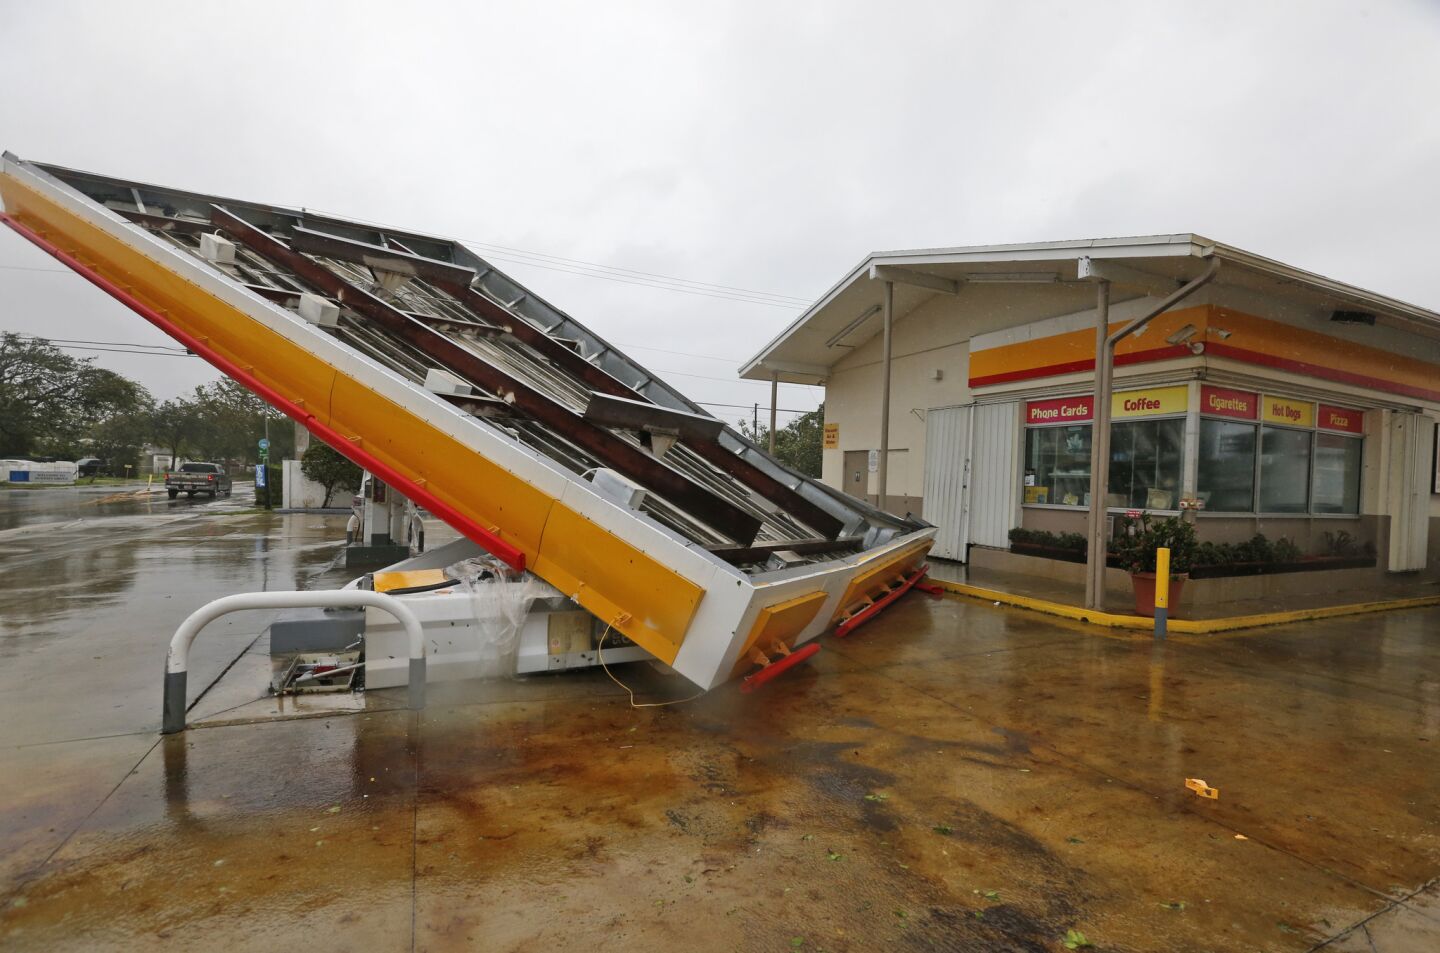 The metal canopy at a gasoline station is overturned by high winds brought on by Hurricane Irma.